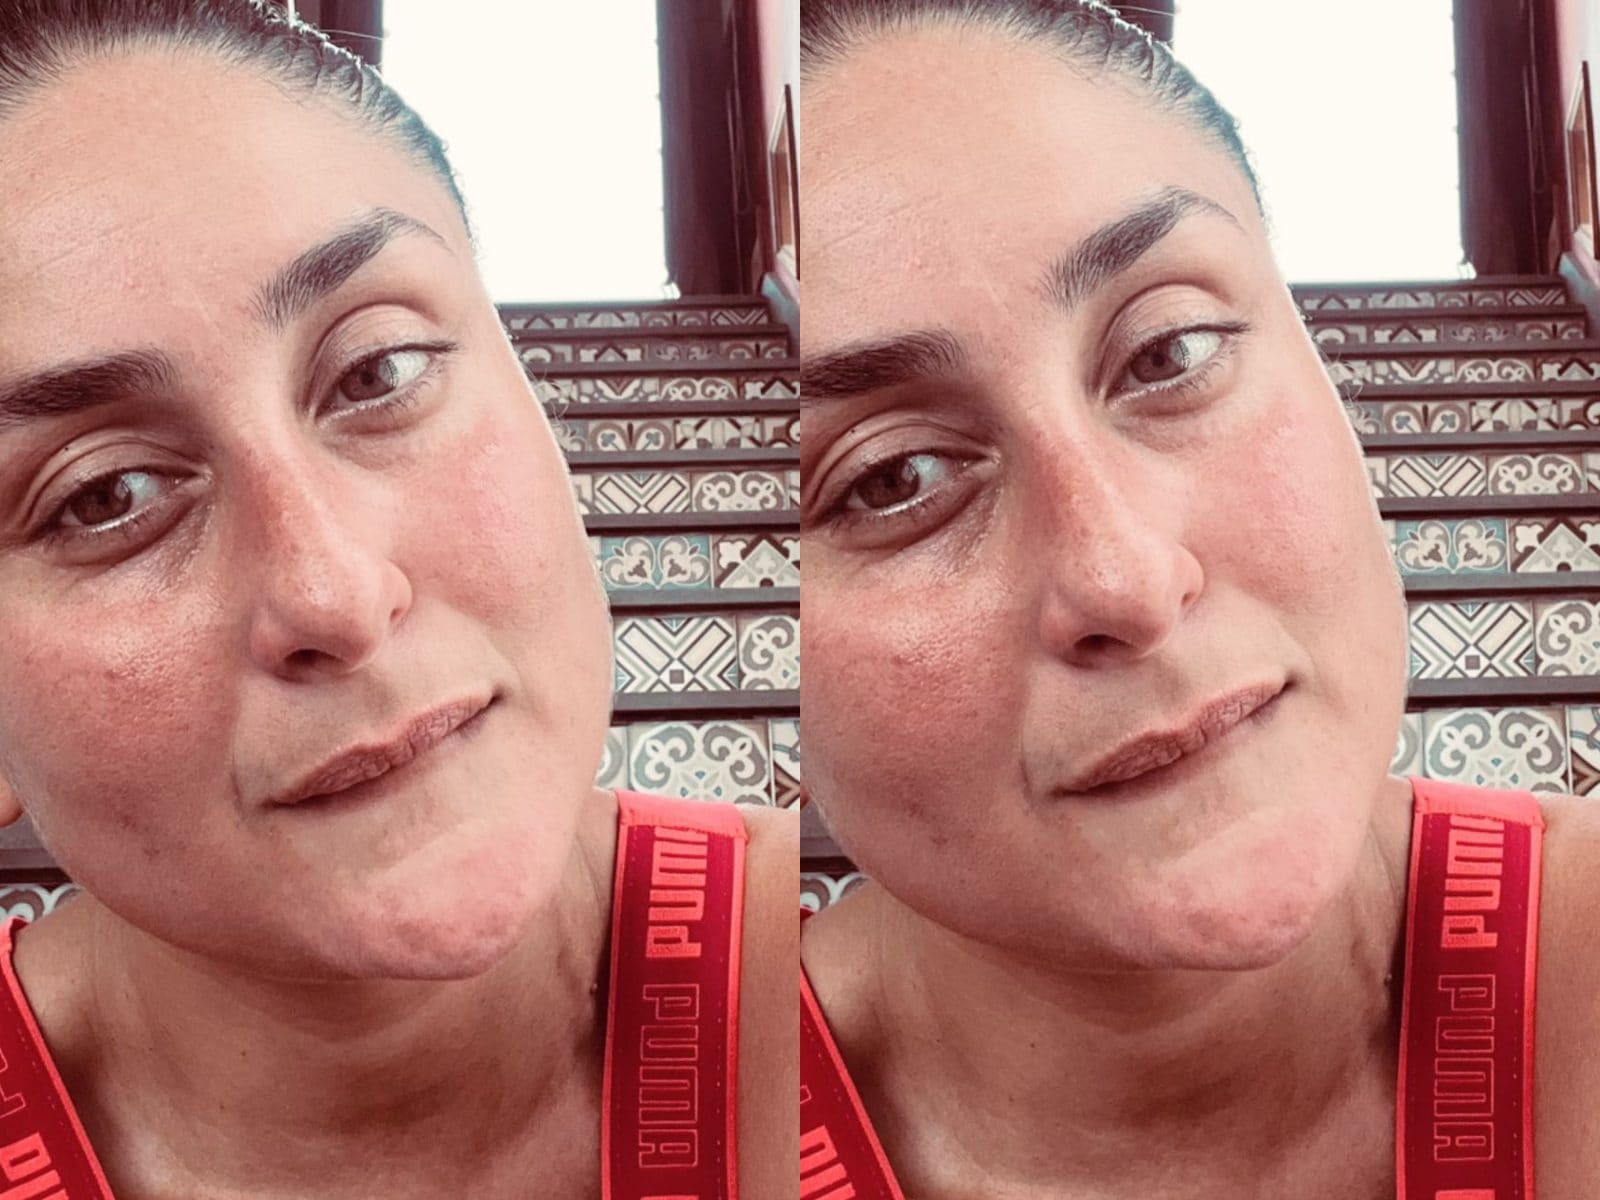 Kareena Xxxx - Kareena Kapoor Khan Looks Exquisite In Latest Pic As She Shows The  'Stairway To Her Heart' - News18